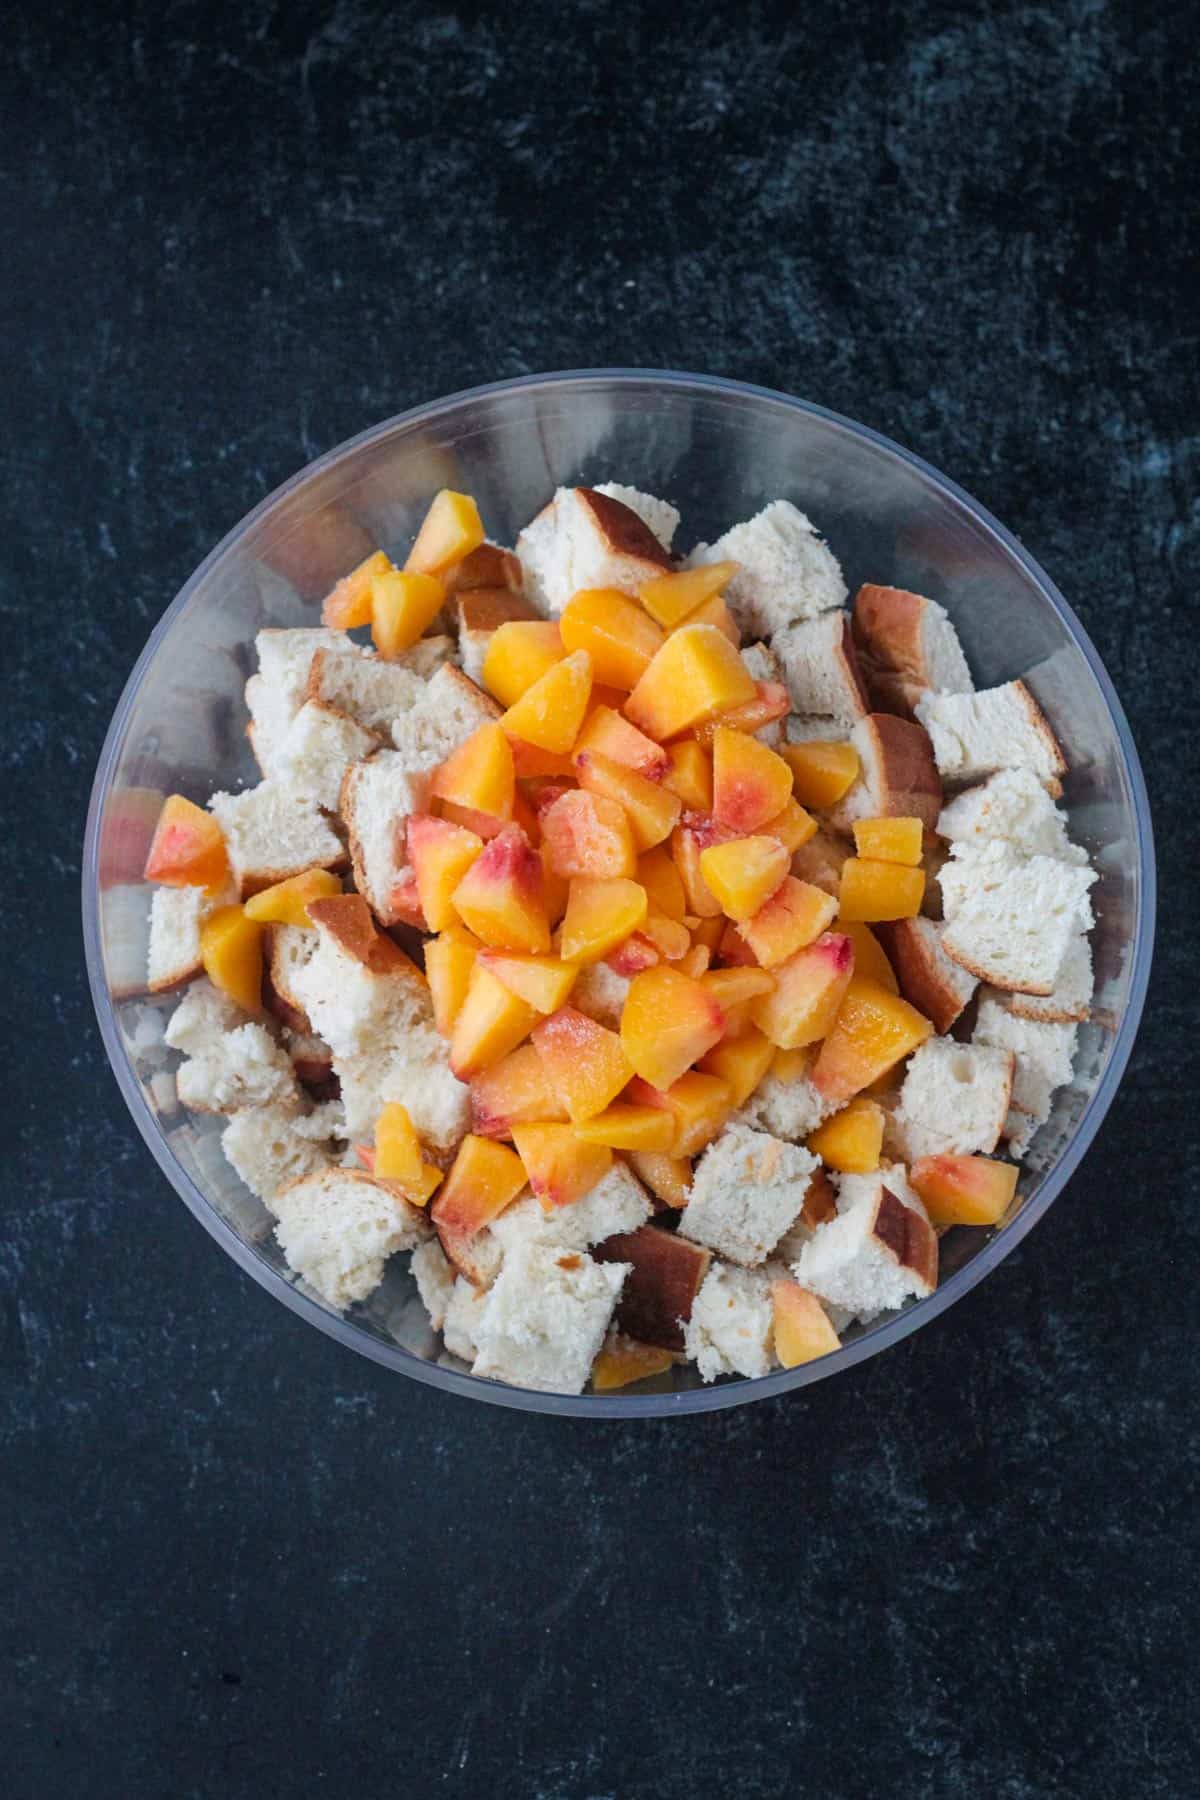 Diced peaches in a bowl on top of cubed bread.